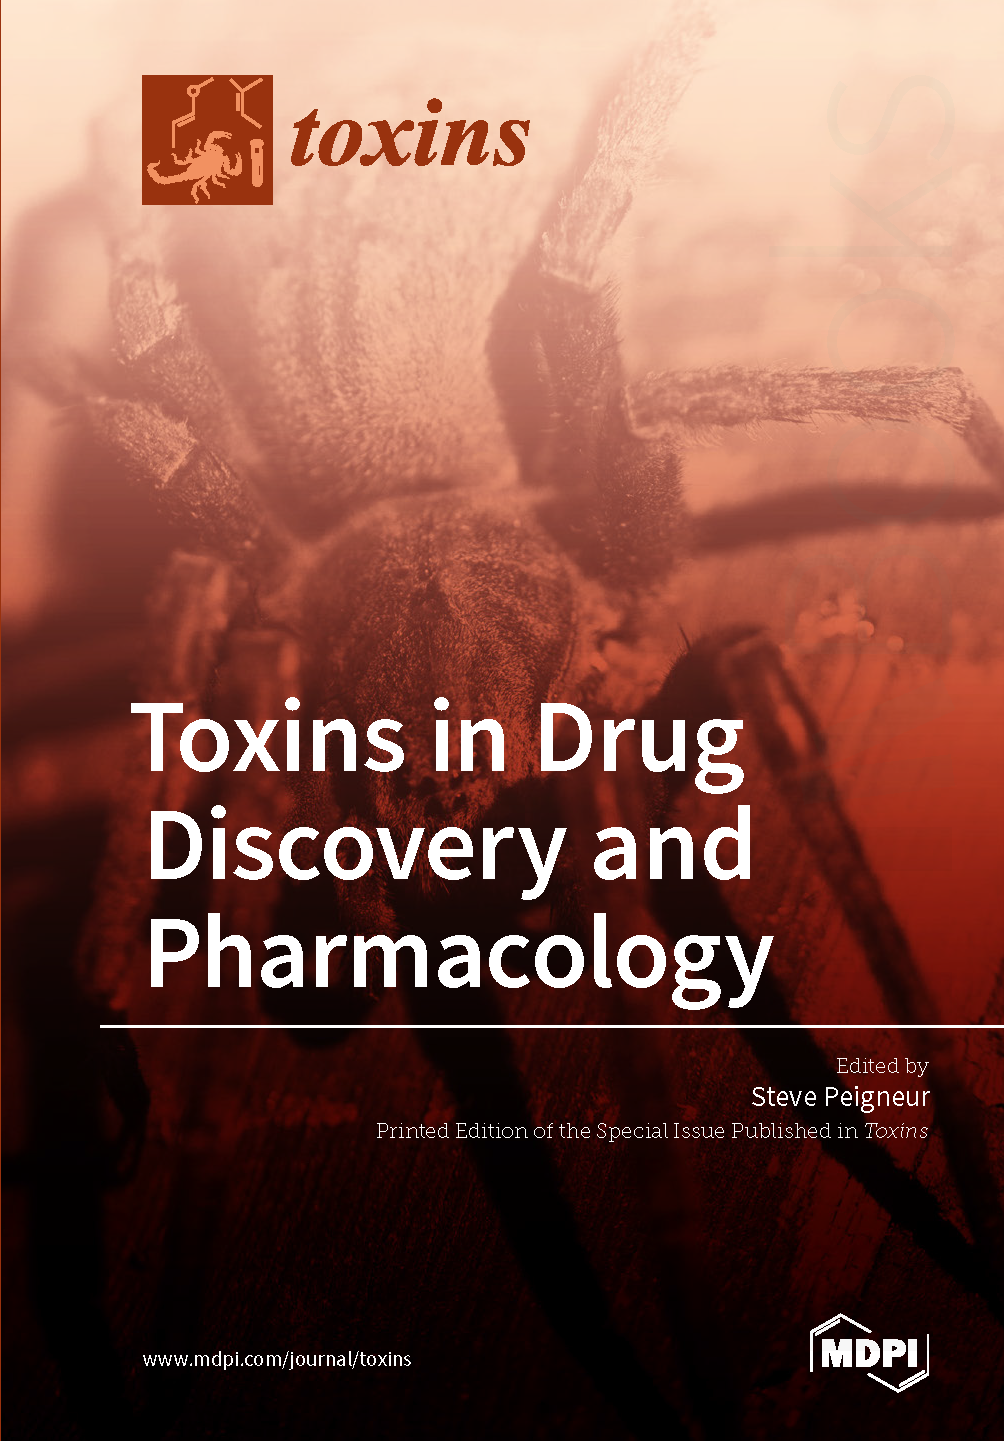 Toxins in Drug Discovery and Pharmacology